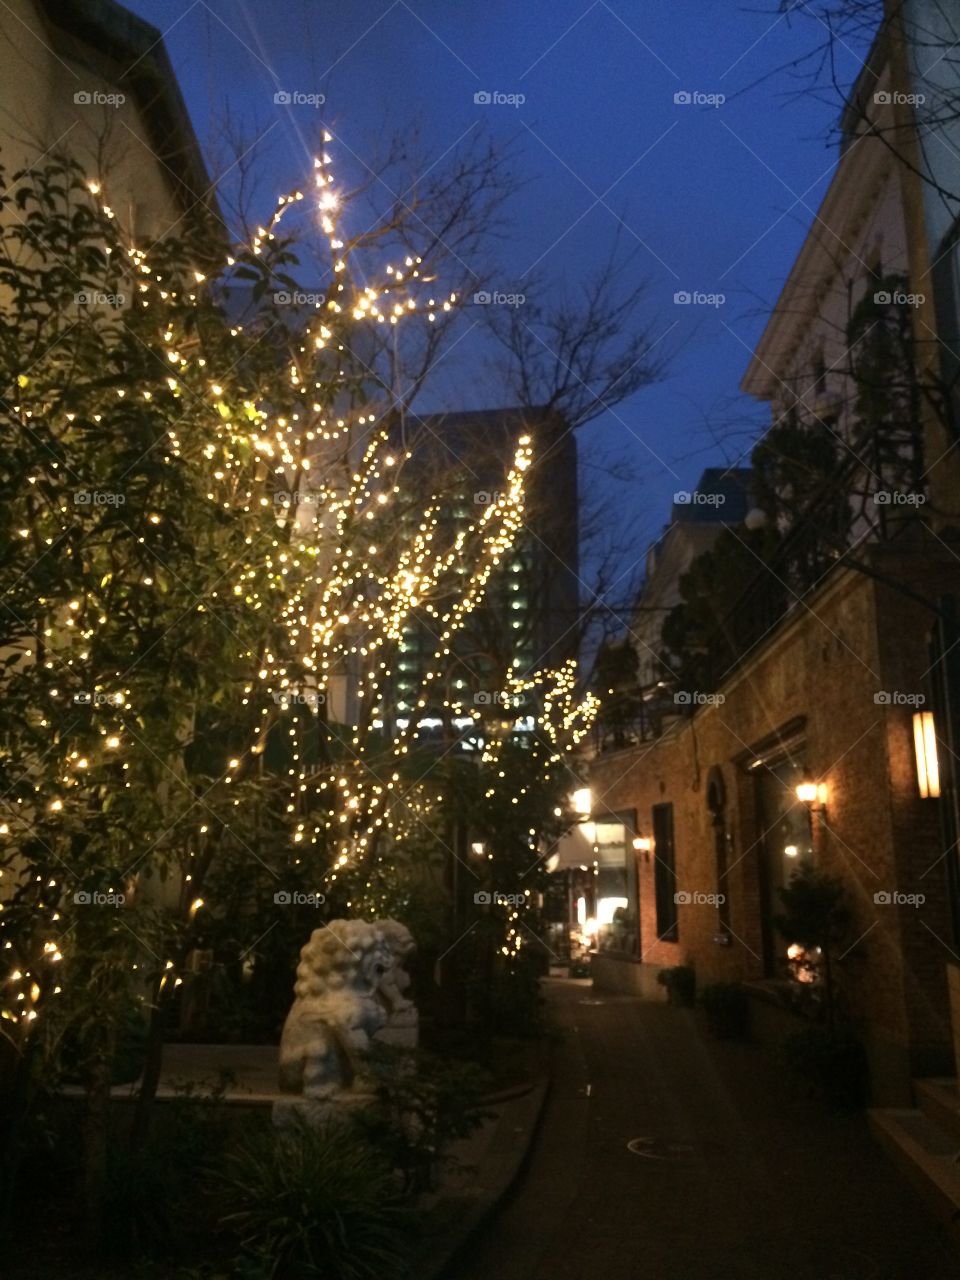 Fairy lights in the street